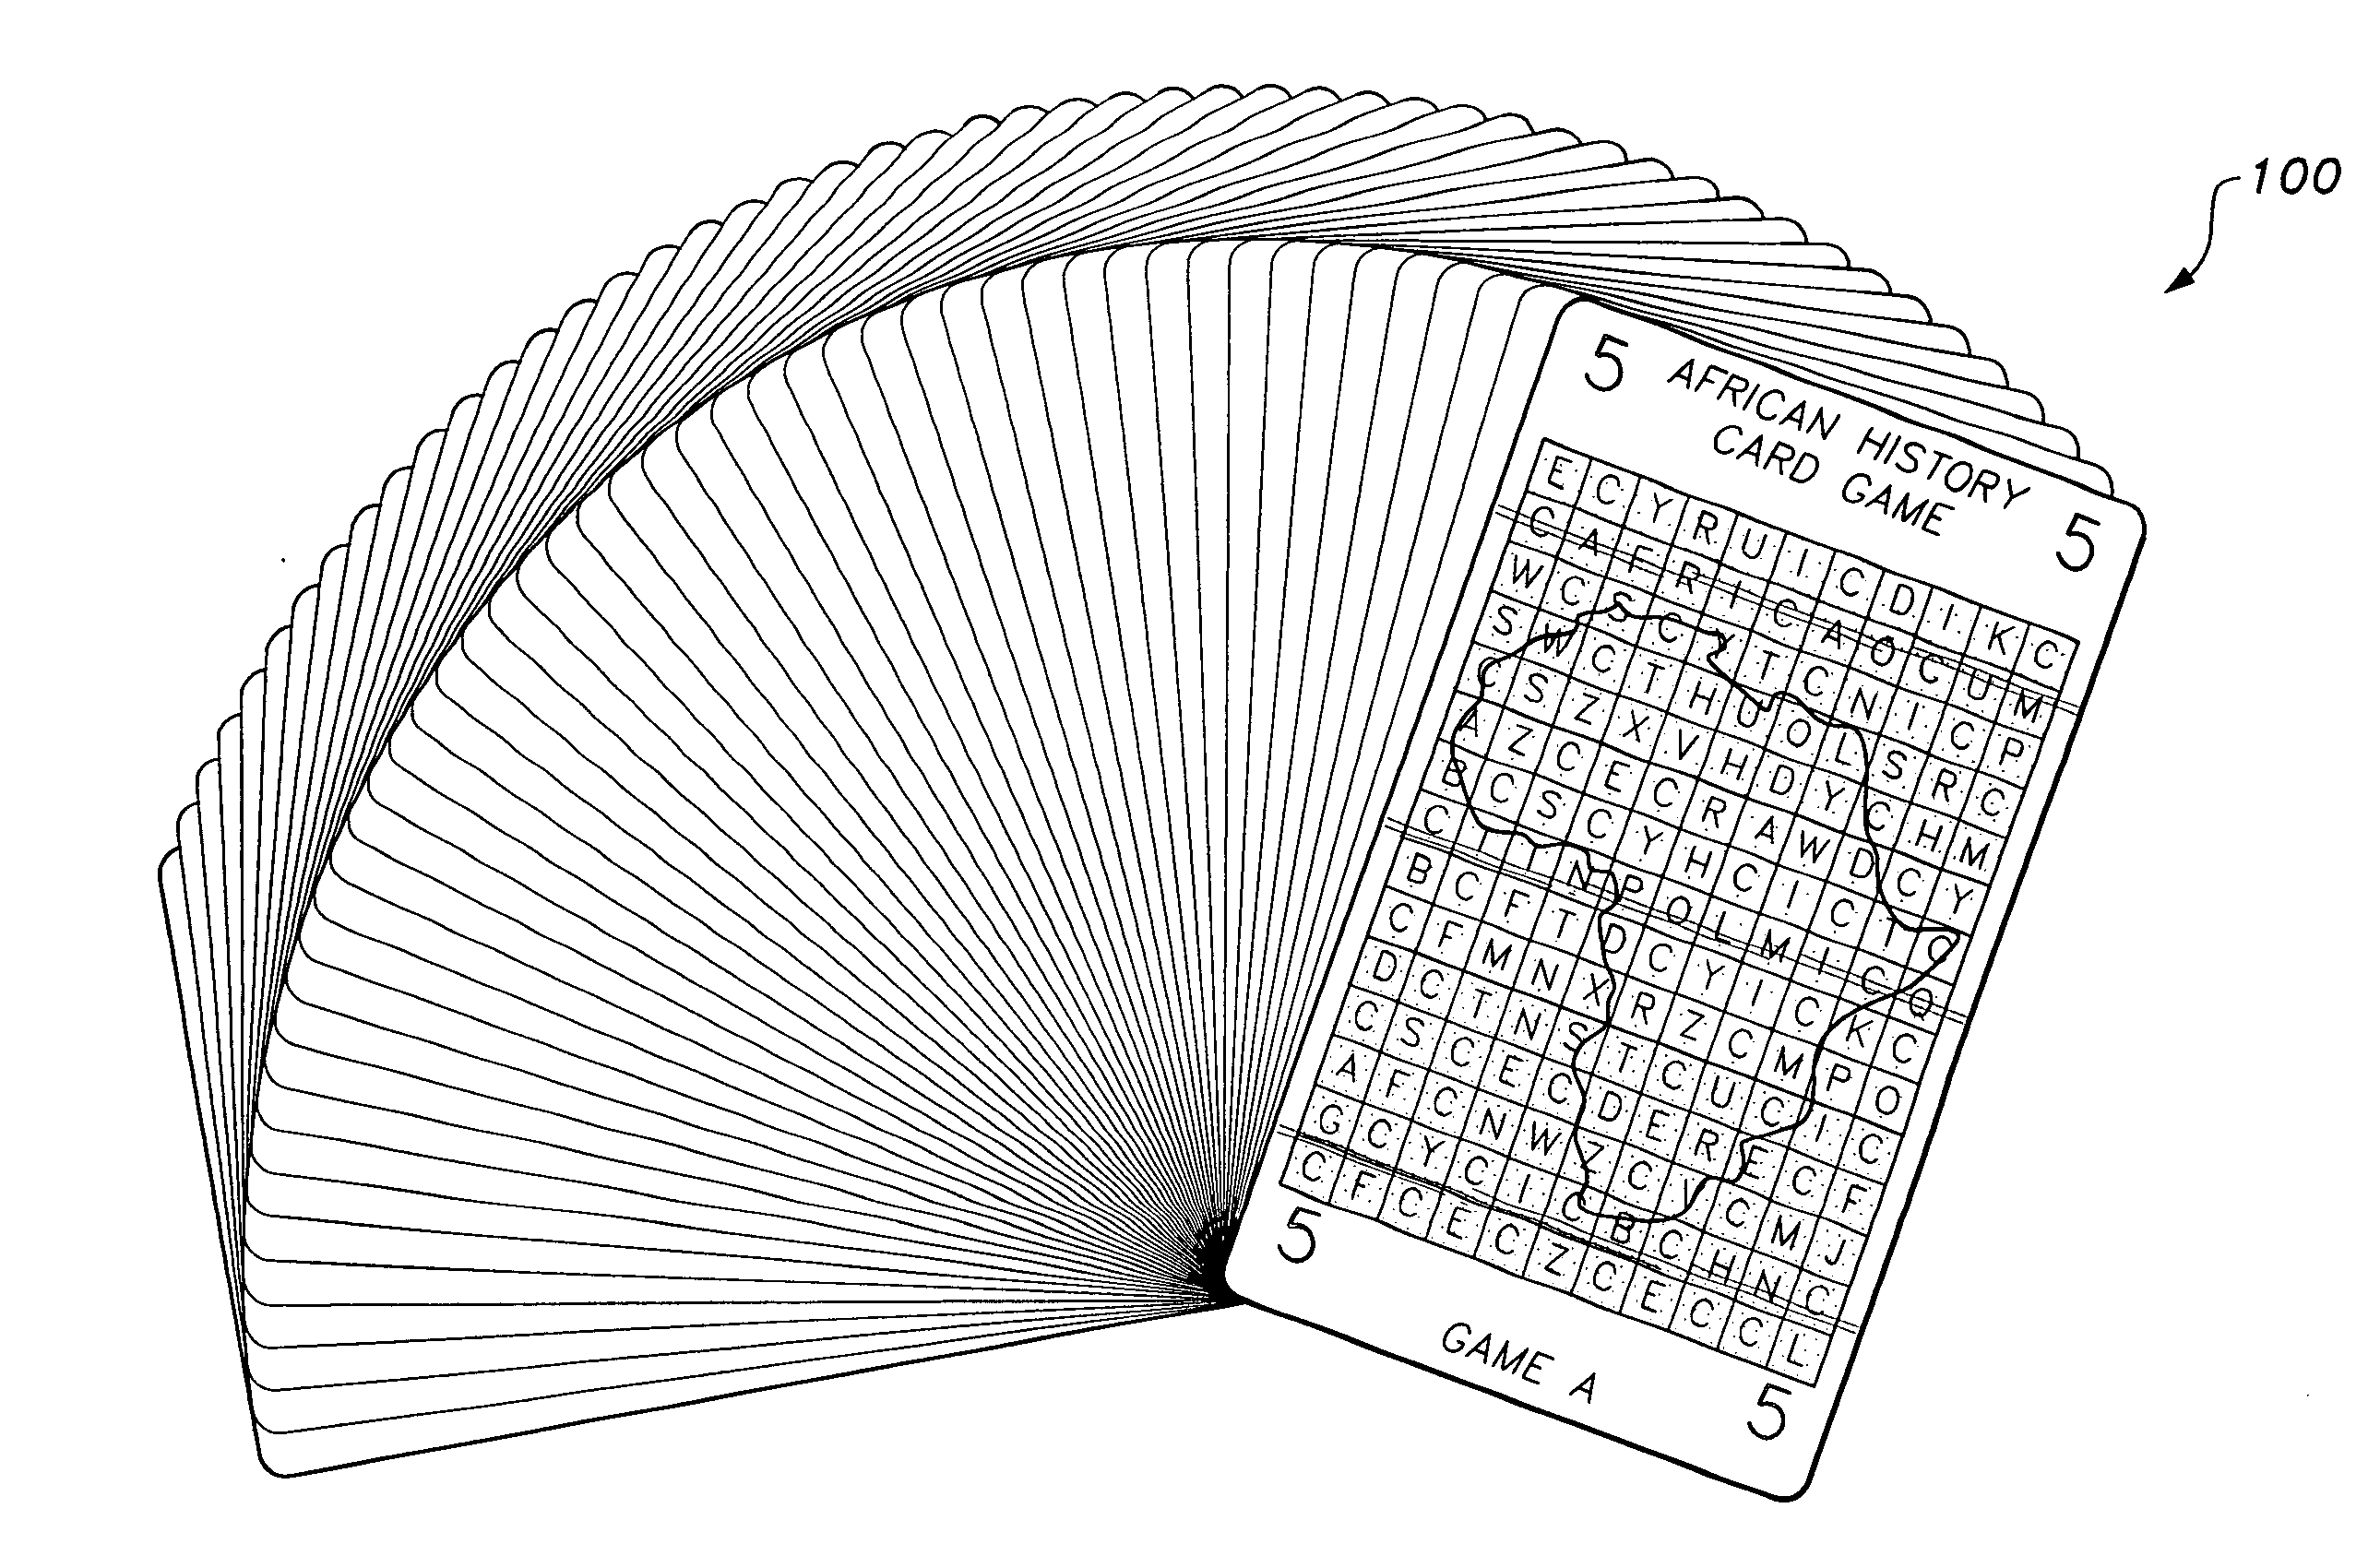 African history card game